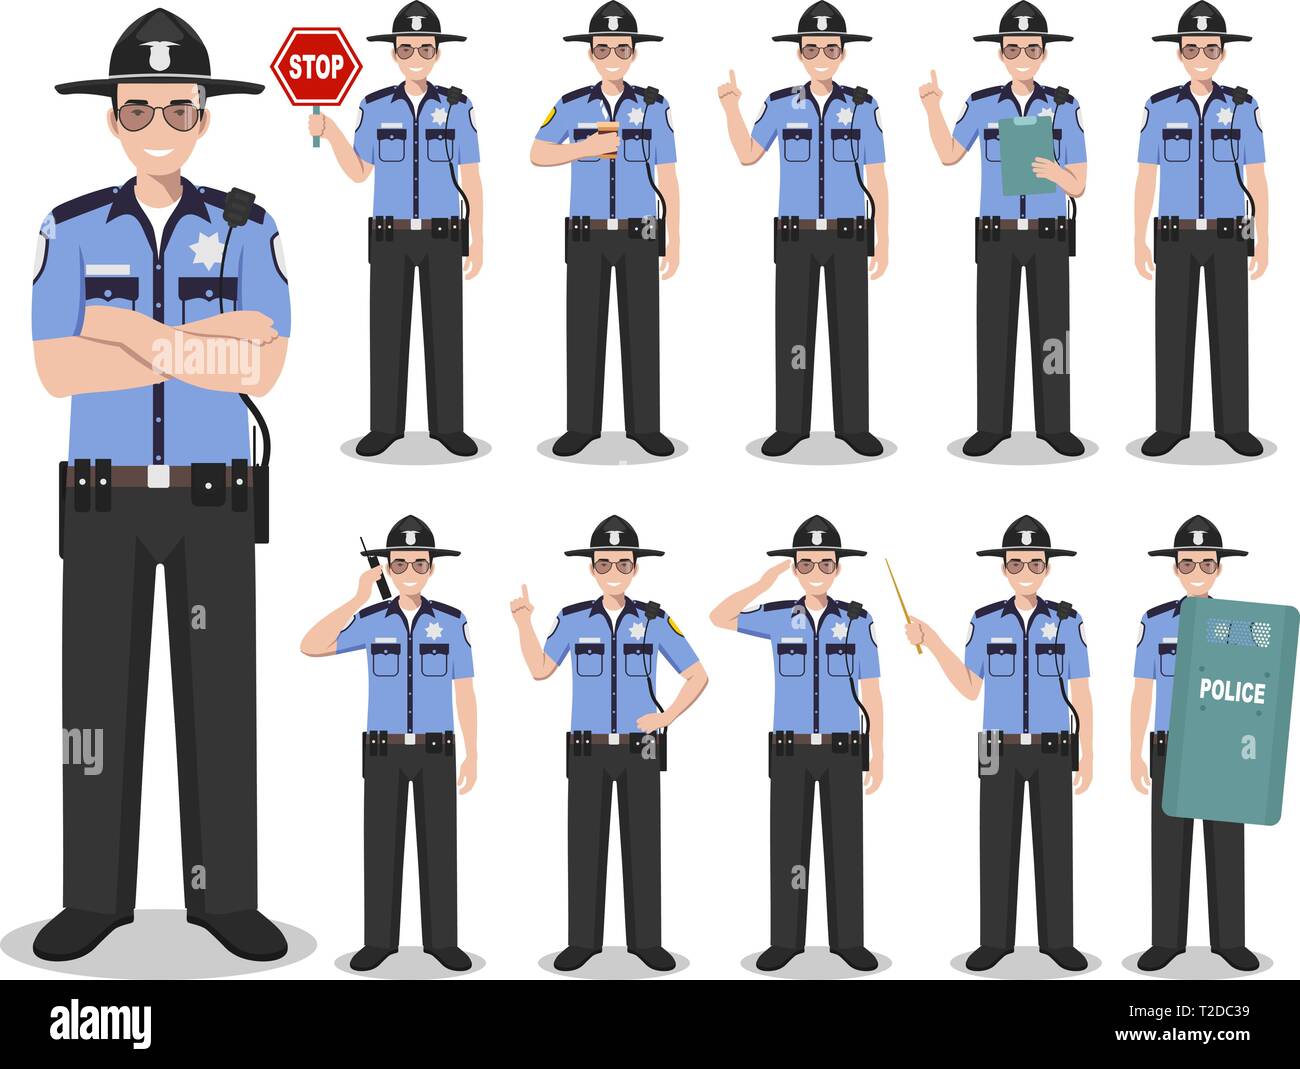 Police people concept. Detailed illustration of american policeman, sheriff standing in different positions in flat style isolated on white background Stock Vector